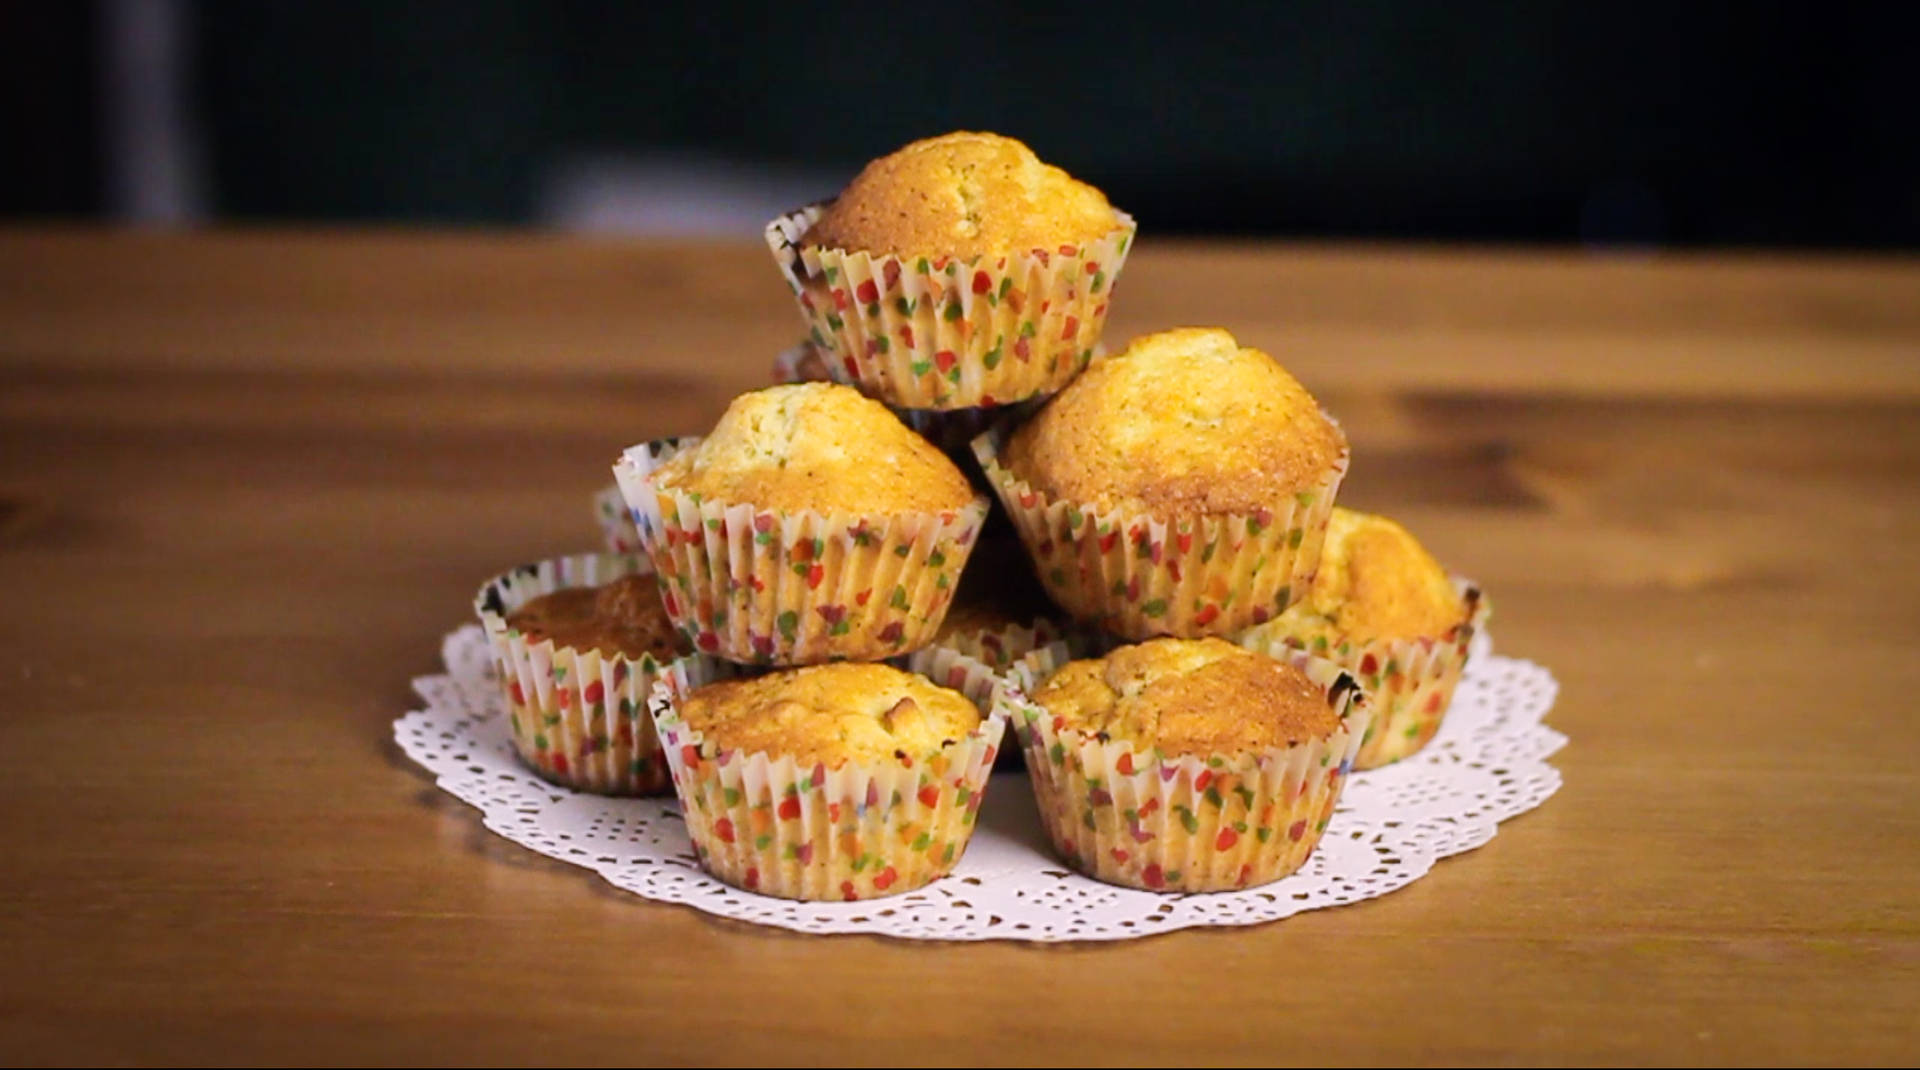 Muffin Pyramid On Table